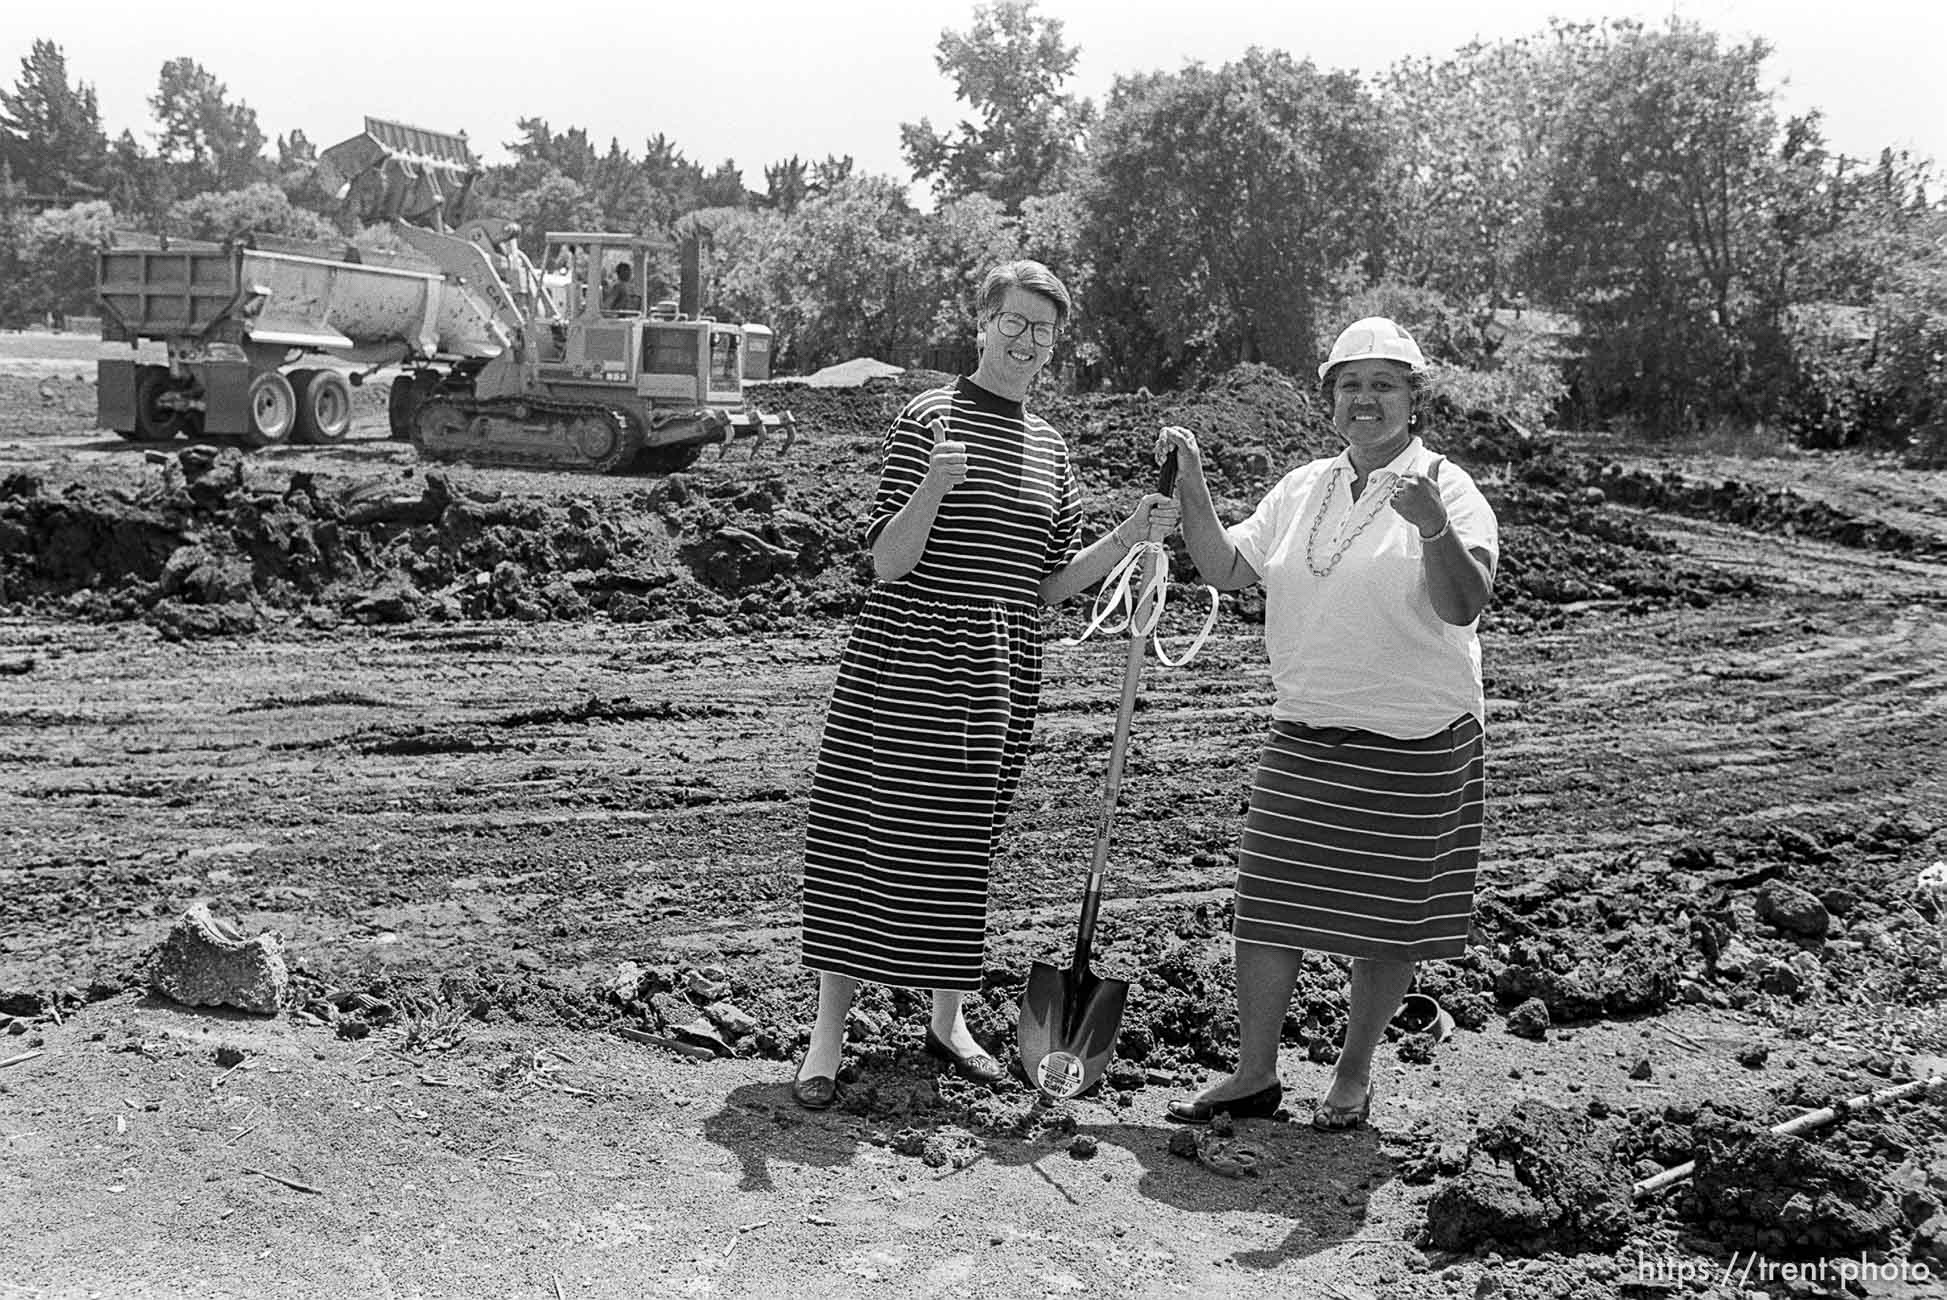 Women in a field with a shovel, giving the thumbs-up sign